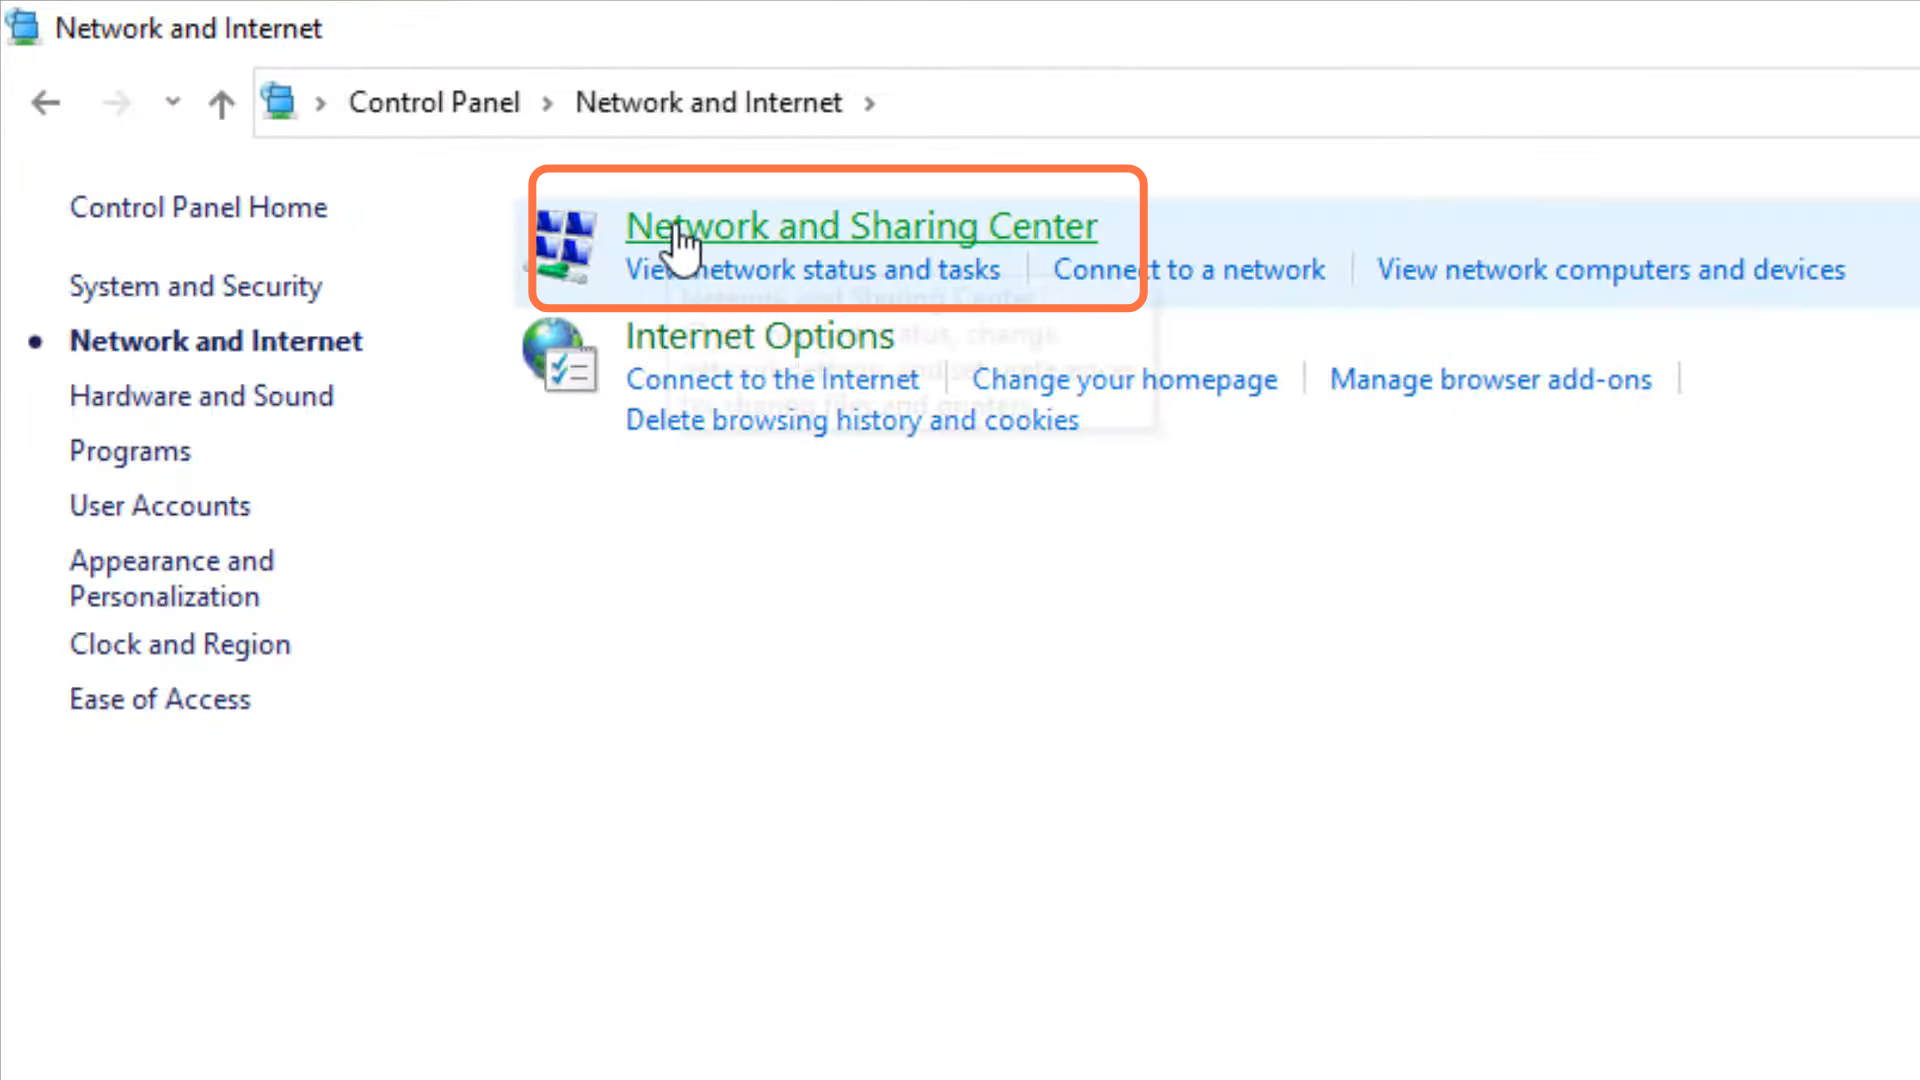 Navigate to Network and sharing center.